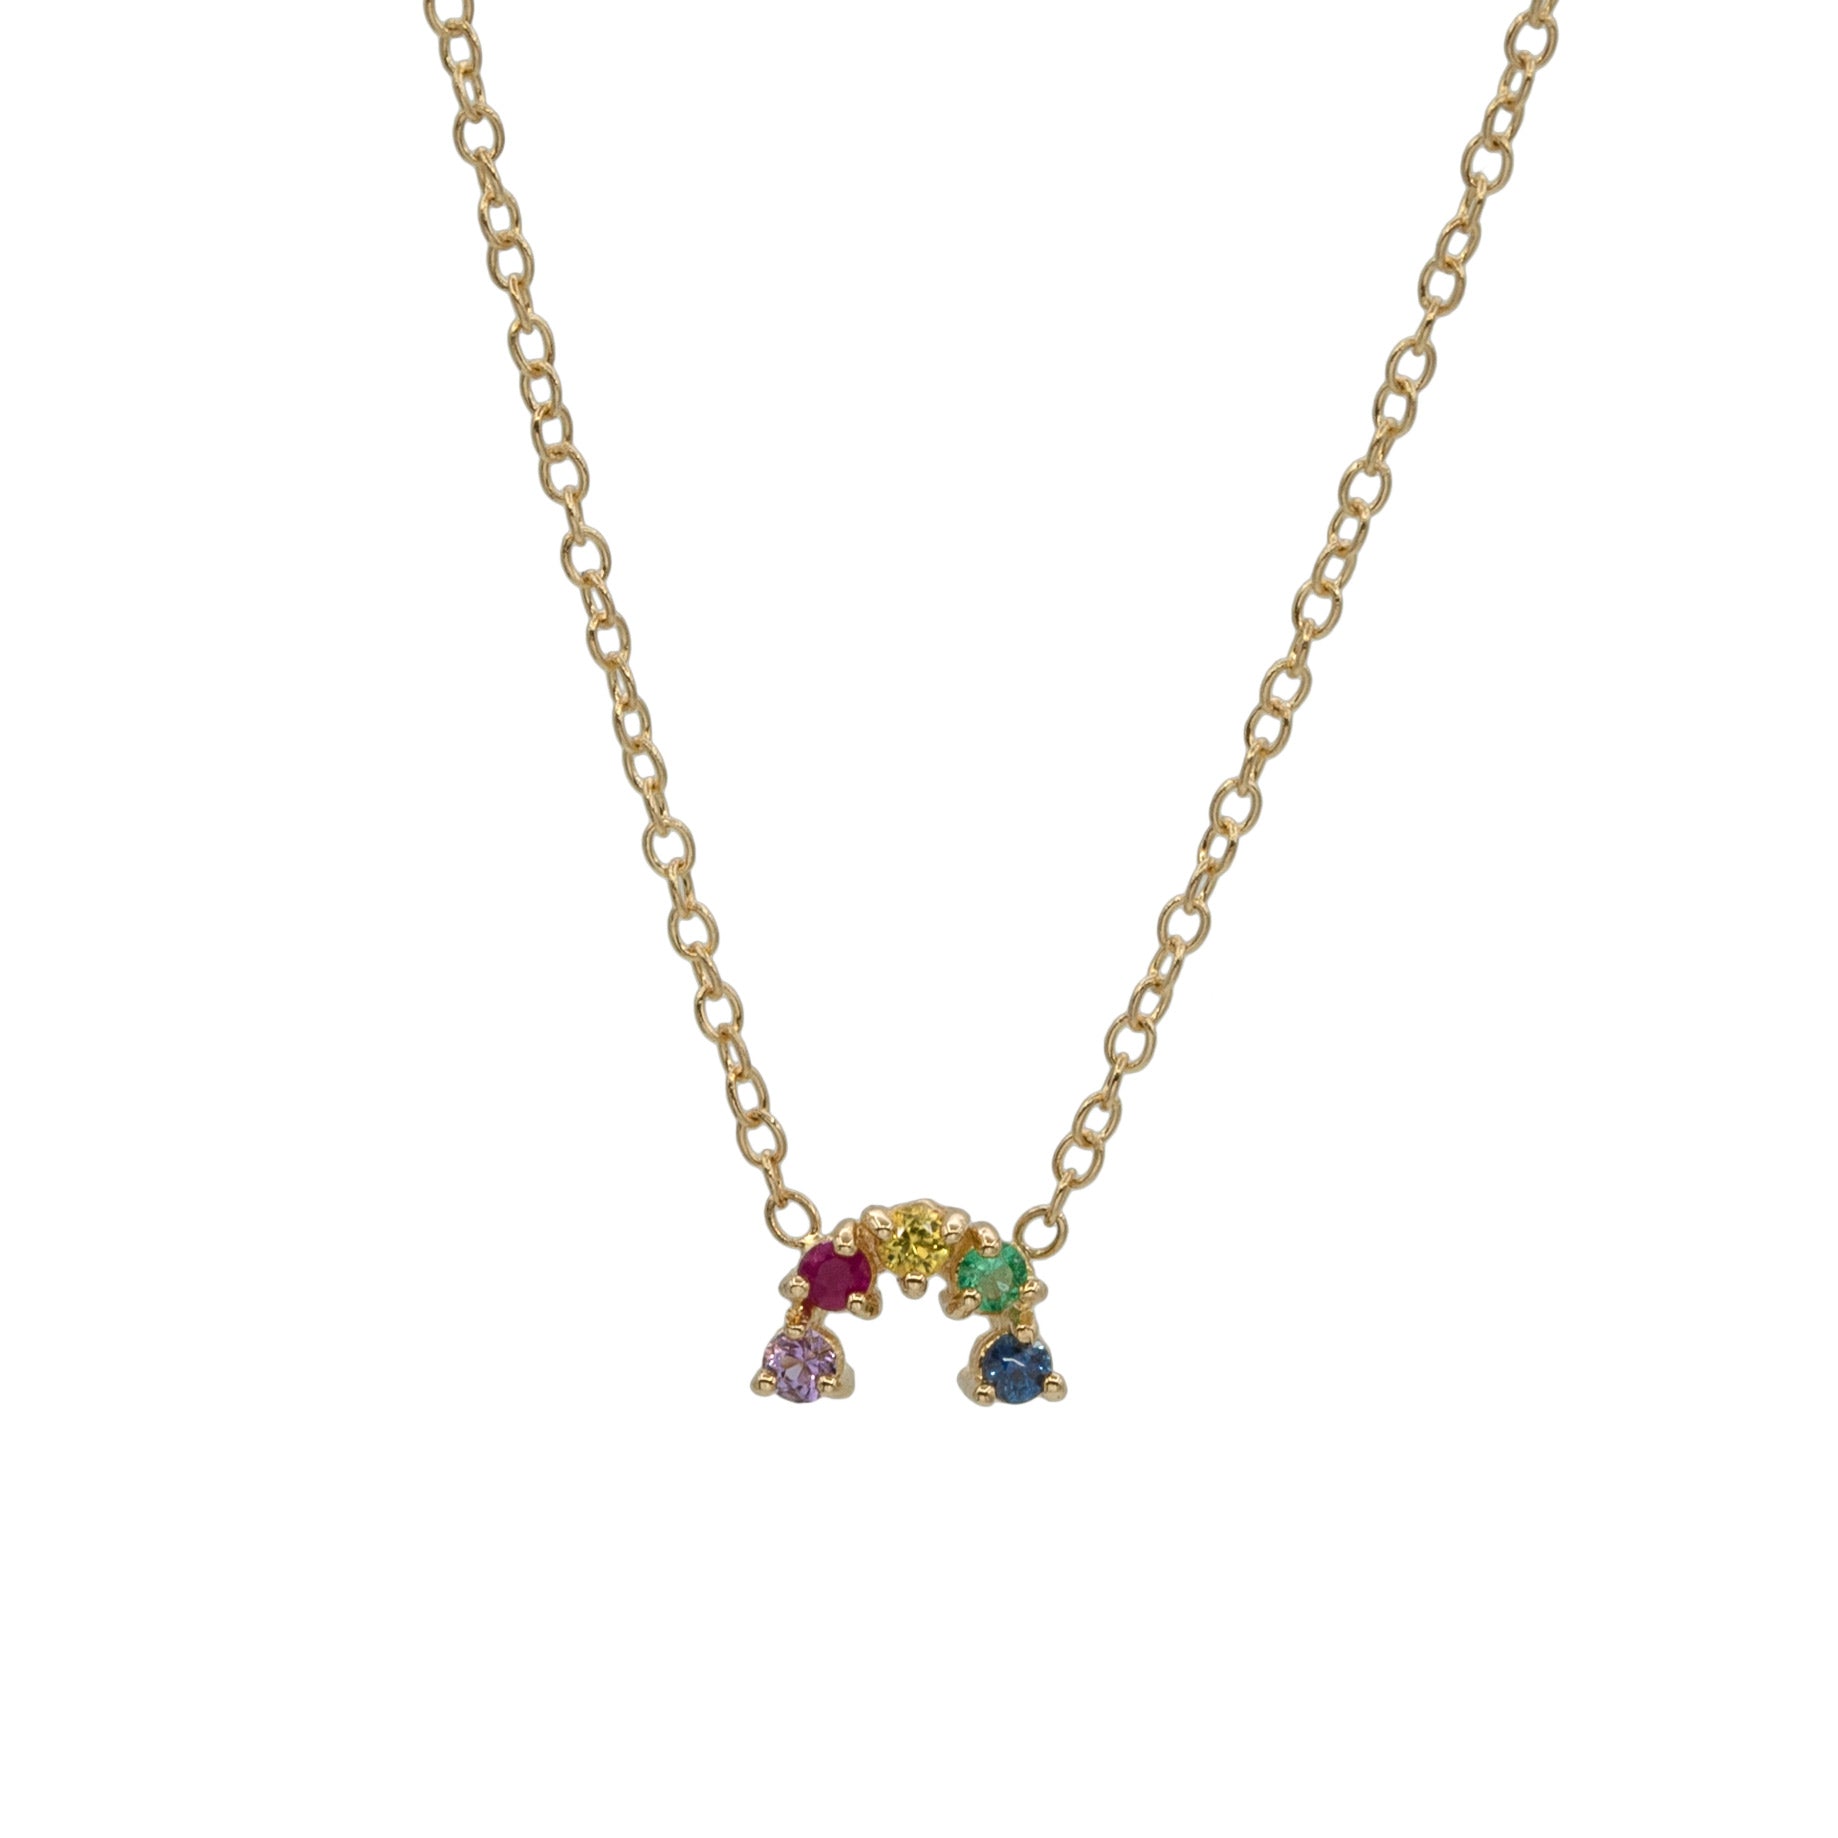 arch rainbow gemstones necklace in 14kt solid gold